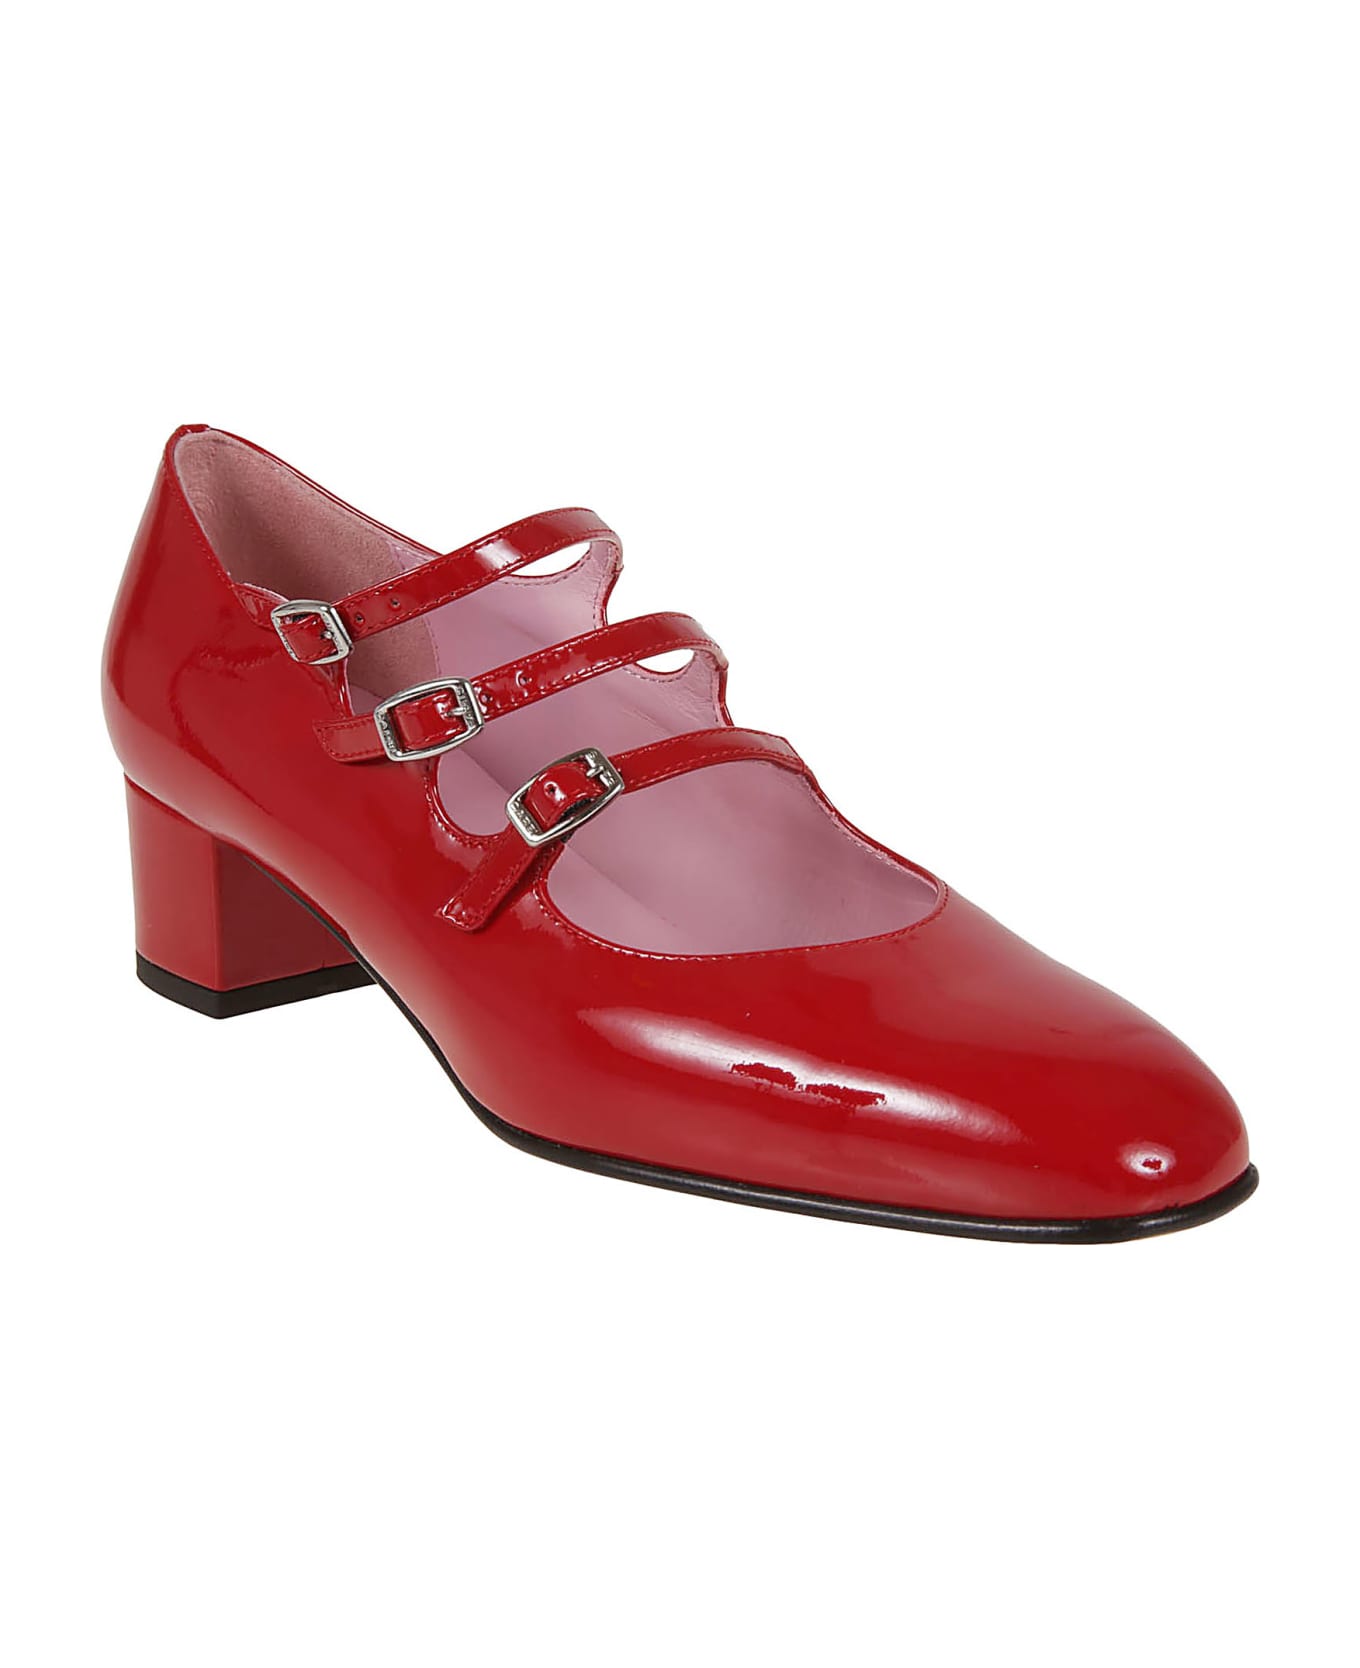 Carel Kina Patent Leather - Red Patent Leather